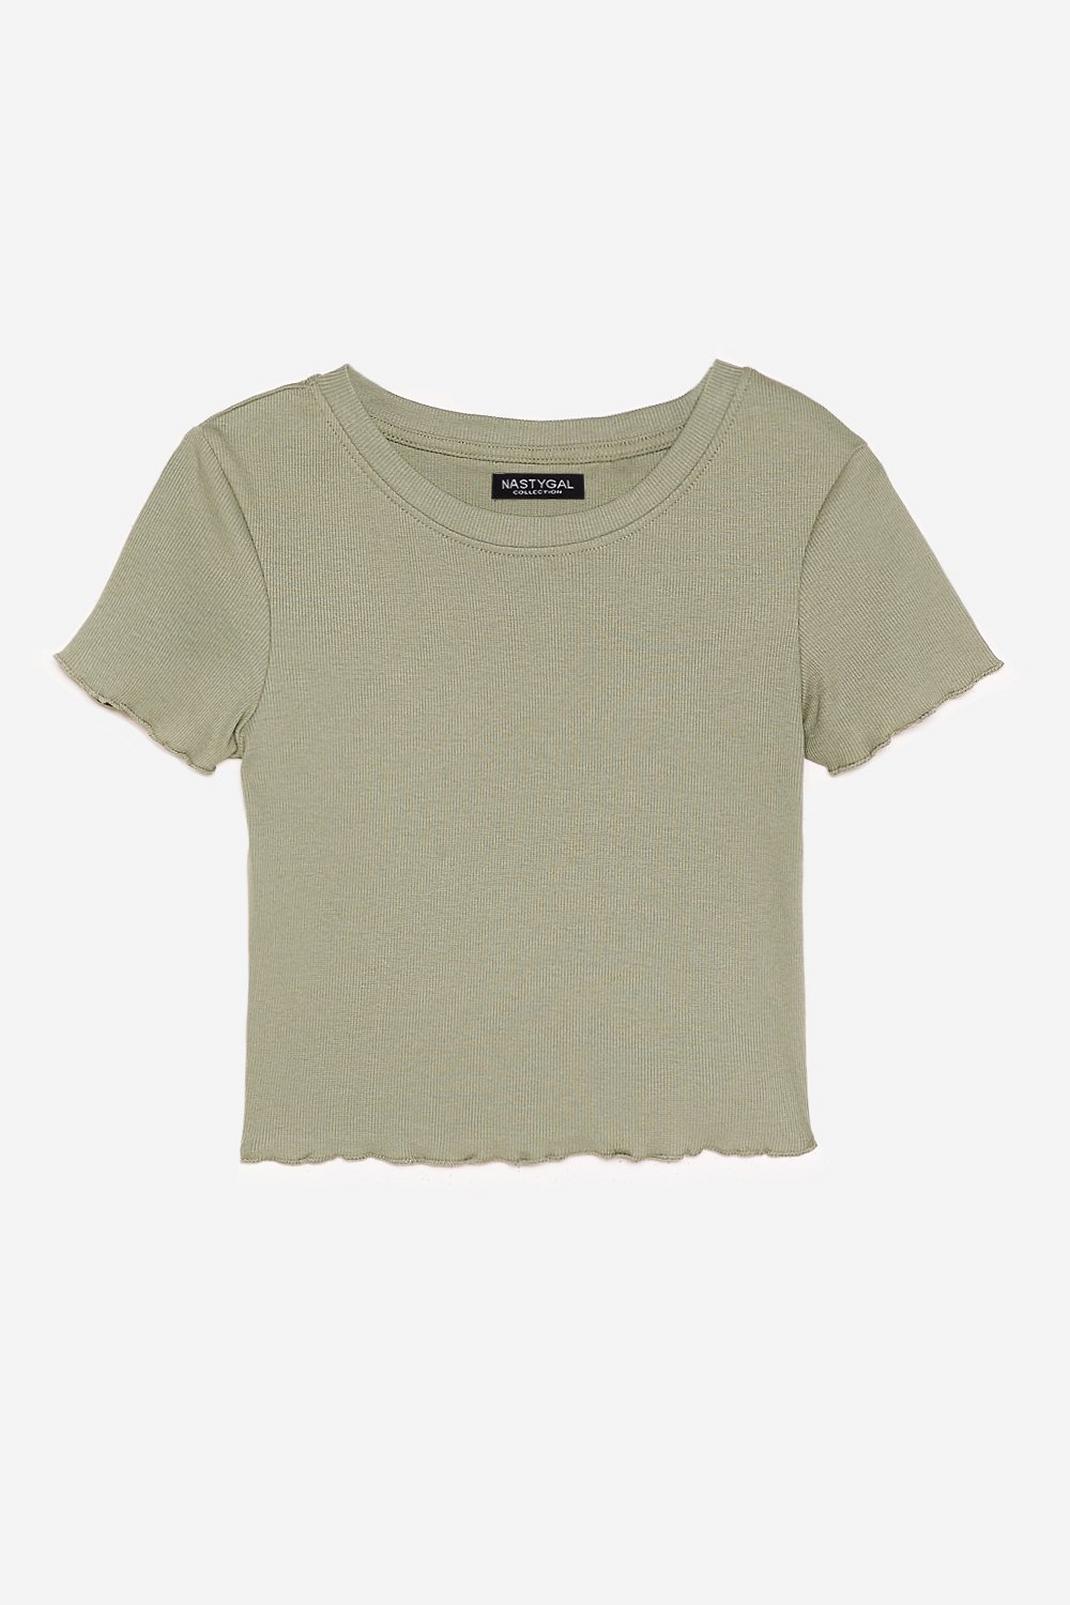 Khaki Give Hem What They Want Ruffle Crop Top image number 1